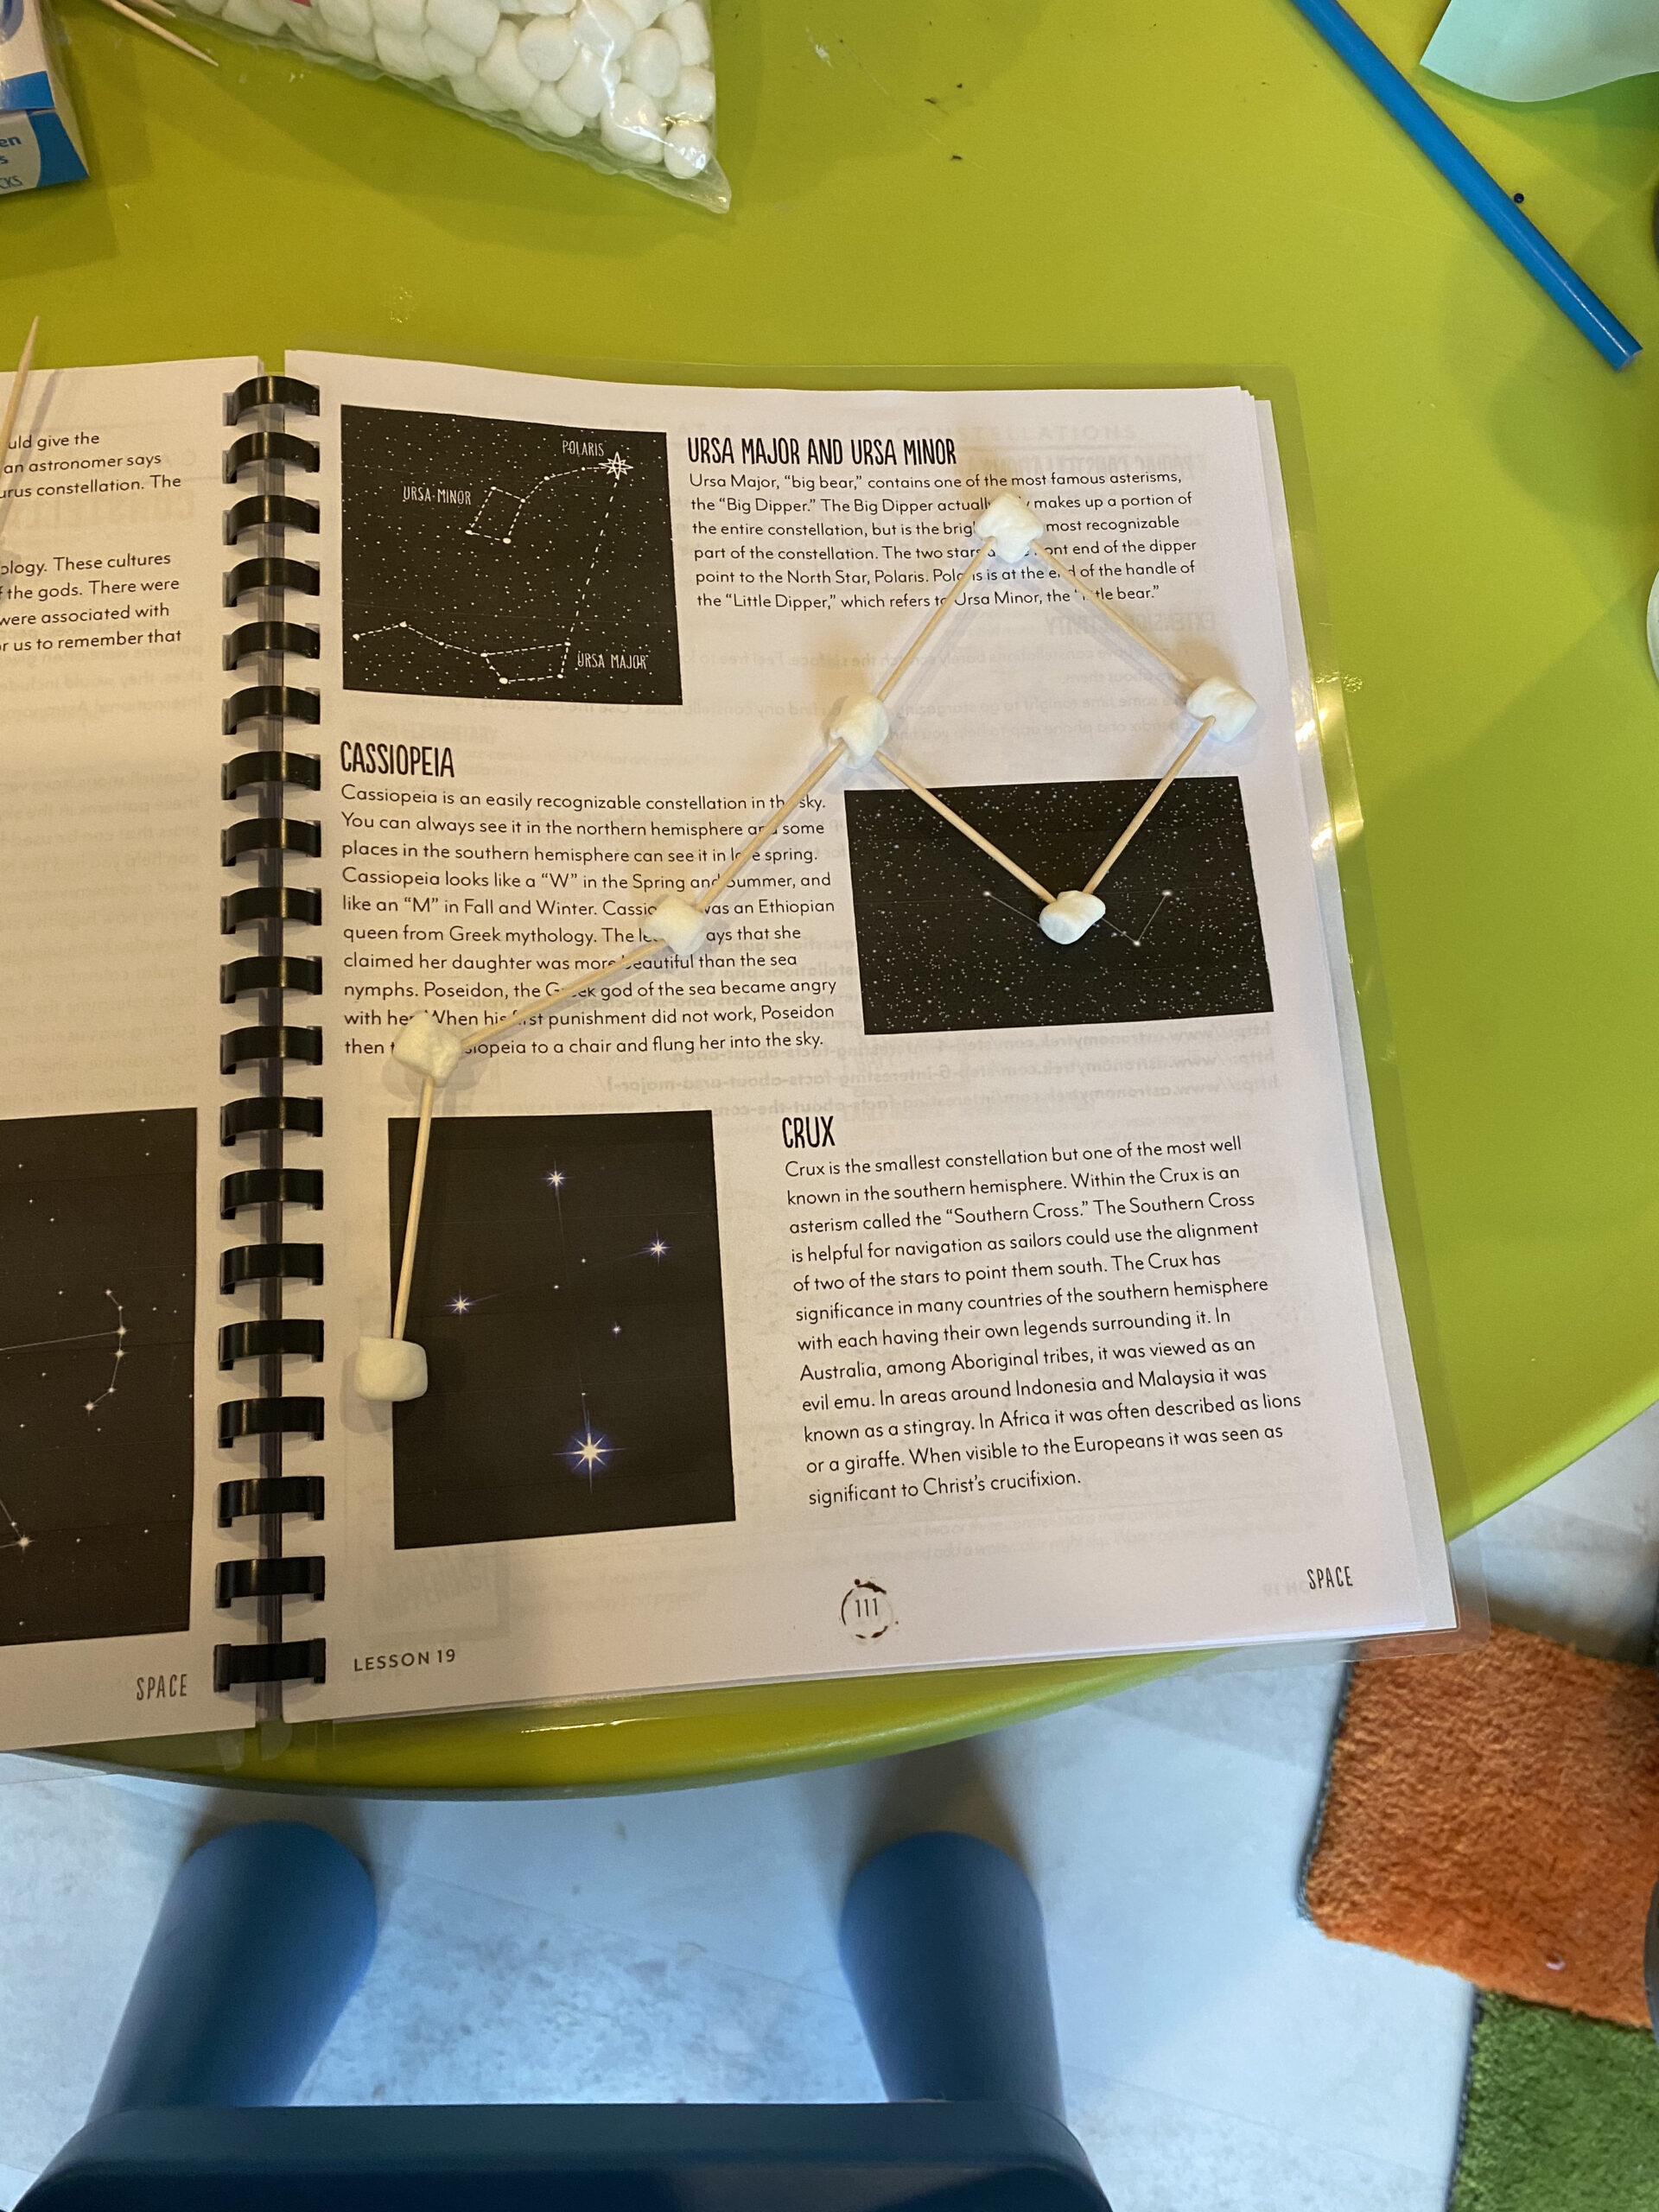 Marshmallow Constellations: Let's create some constellations using mini marshmallows and toothpicks. Have fun and learn about the stars.